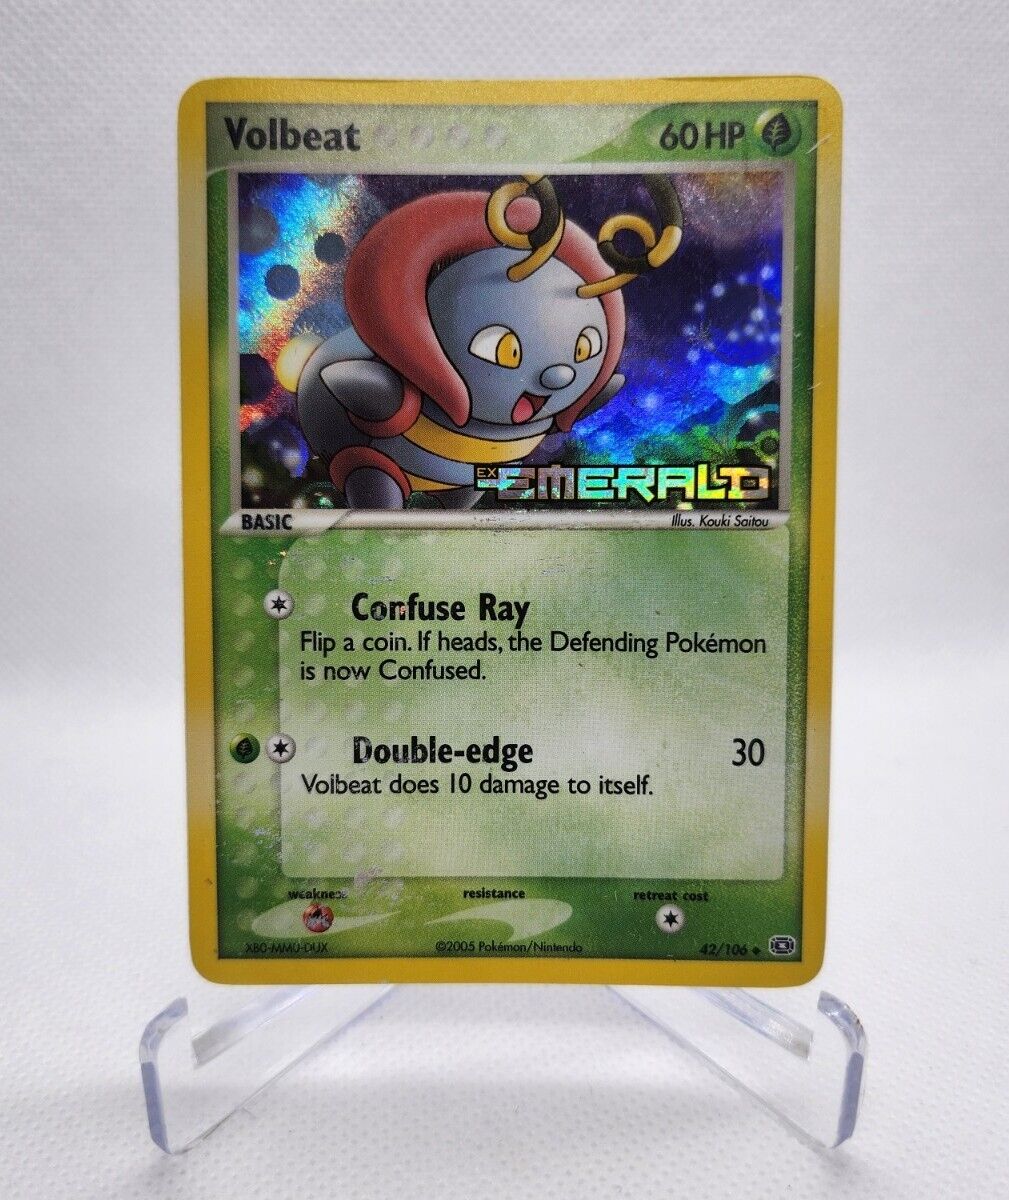 Volbeat 42/106- 2005 EX Emerald Reverse Holographic Pokemon Card - Stamped- MP